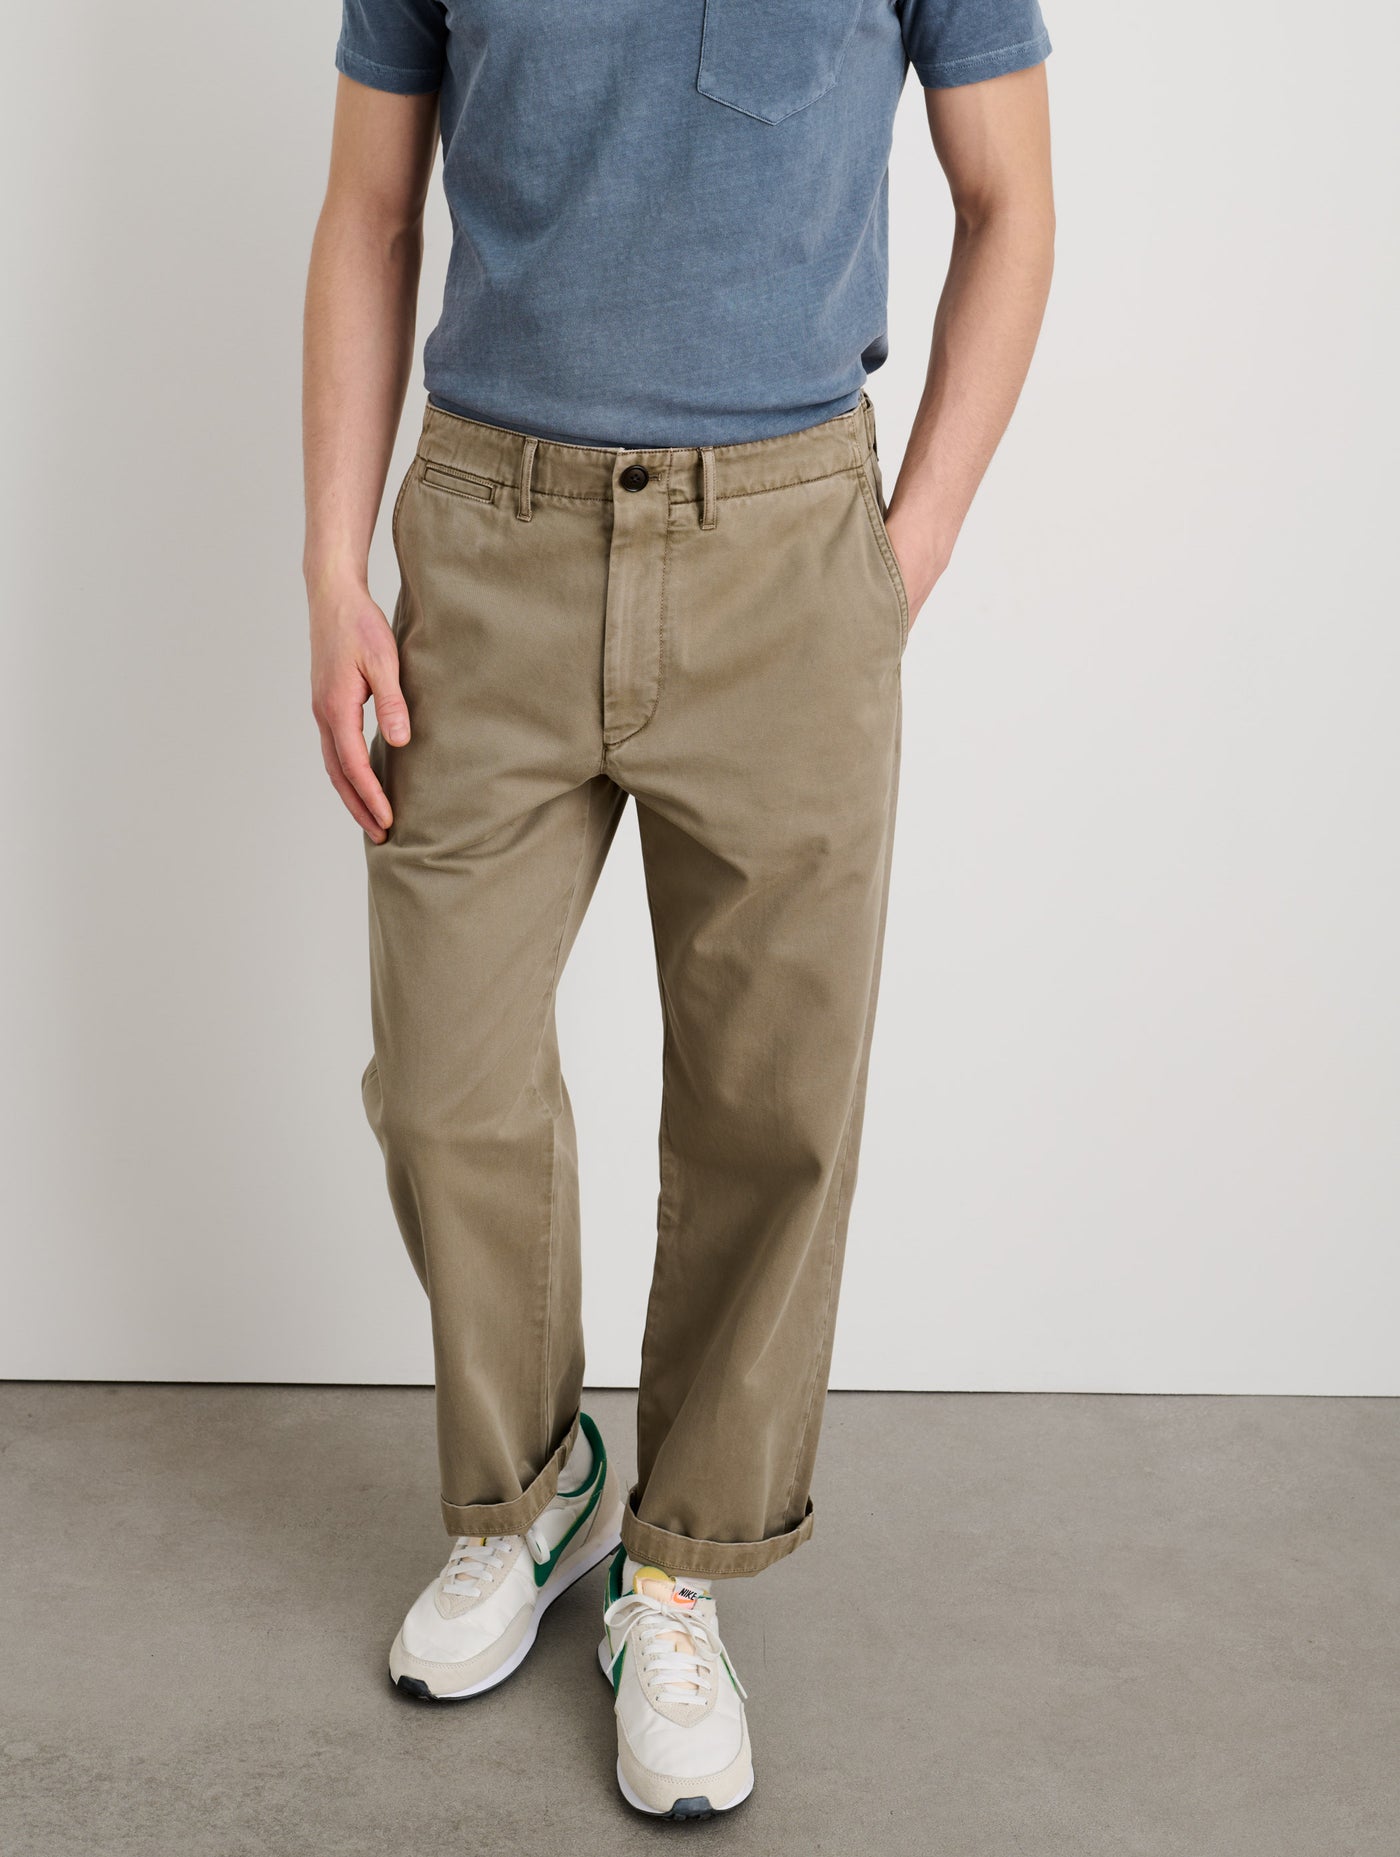 Straight Leg Pant in Vintage Washed Chino